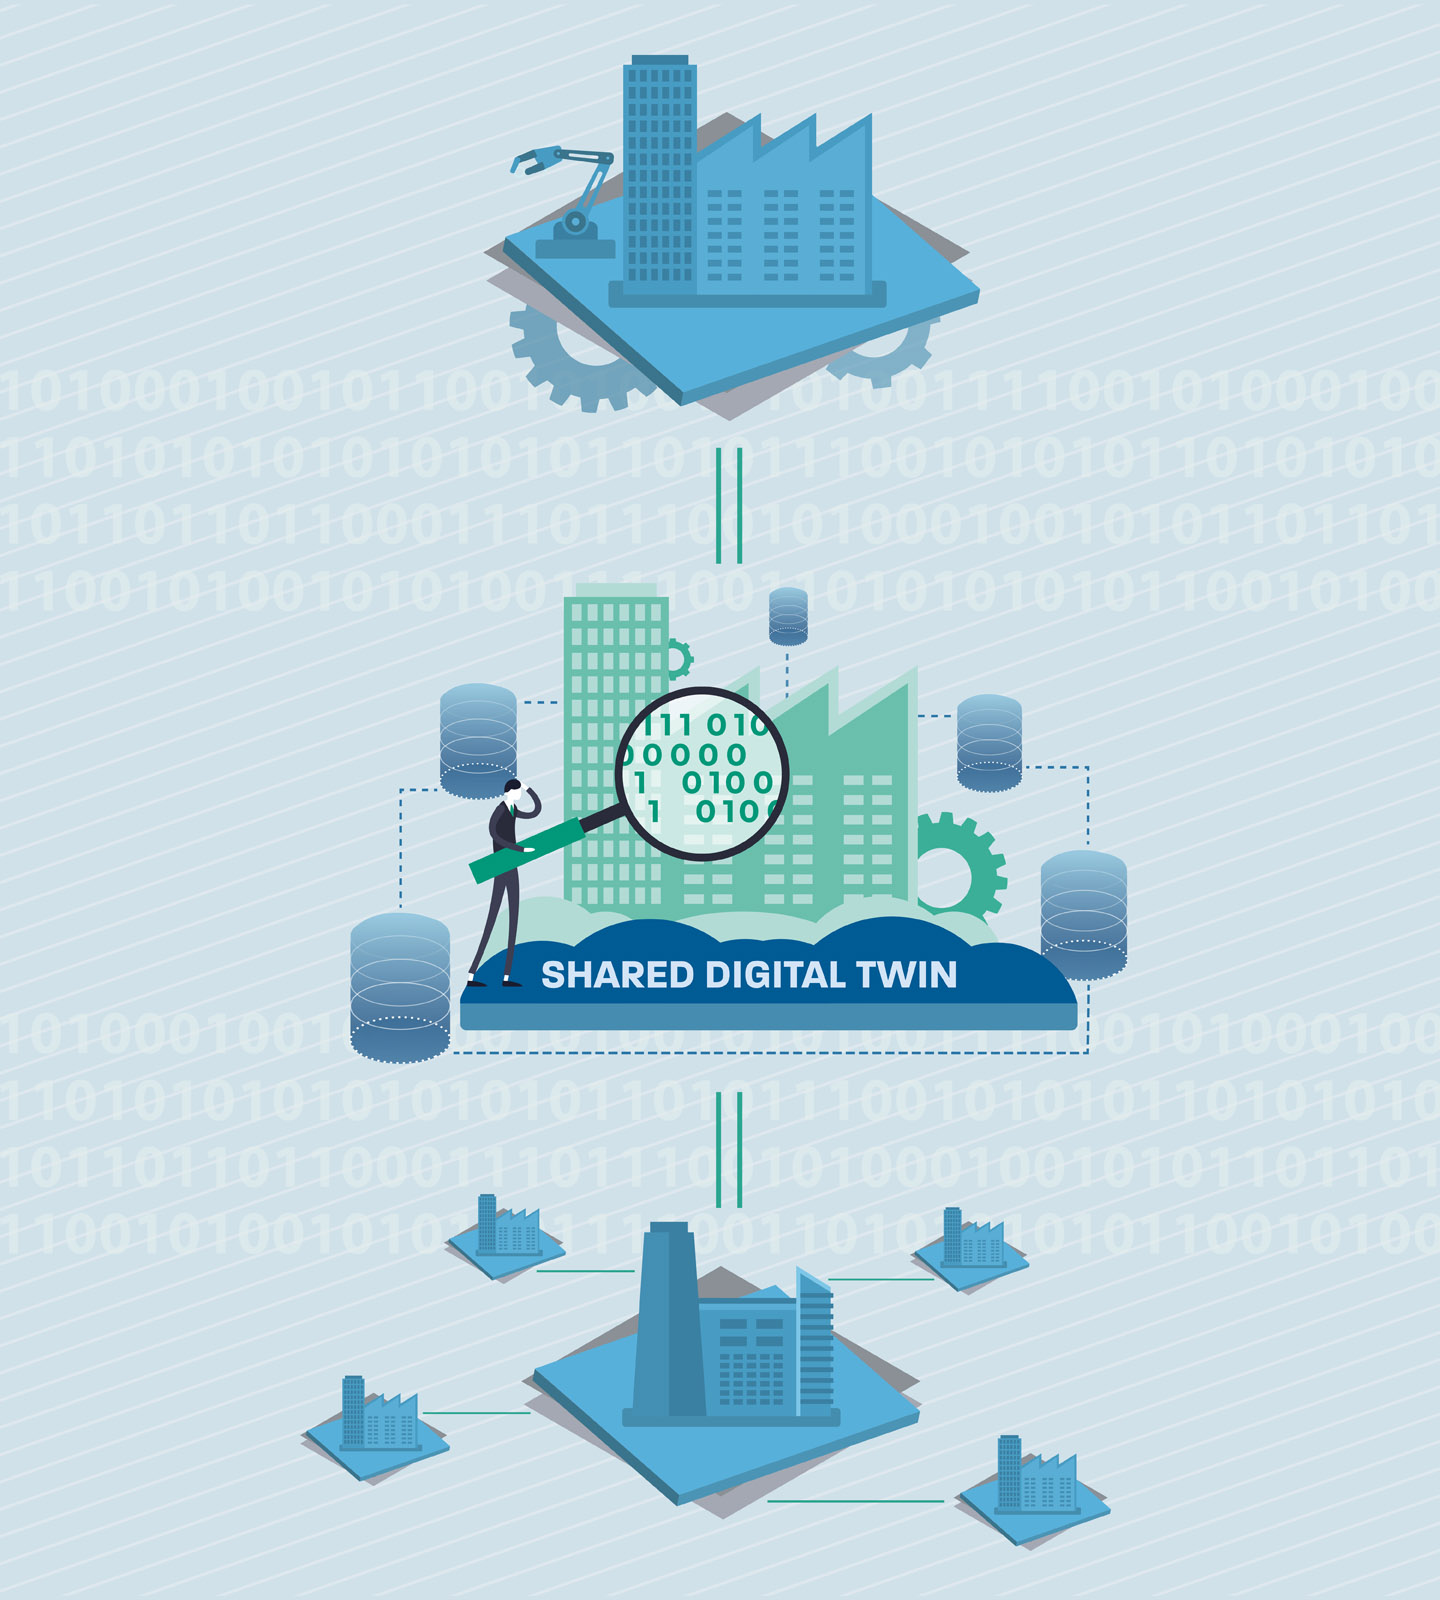 Shared digital twin: Internet technologies are described as cognitive when they enable companies to share manufacturing data in a secure, controlled environment.